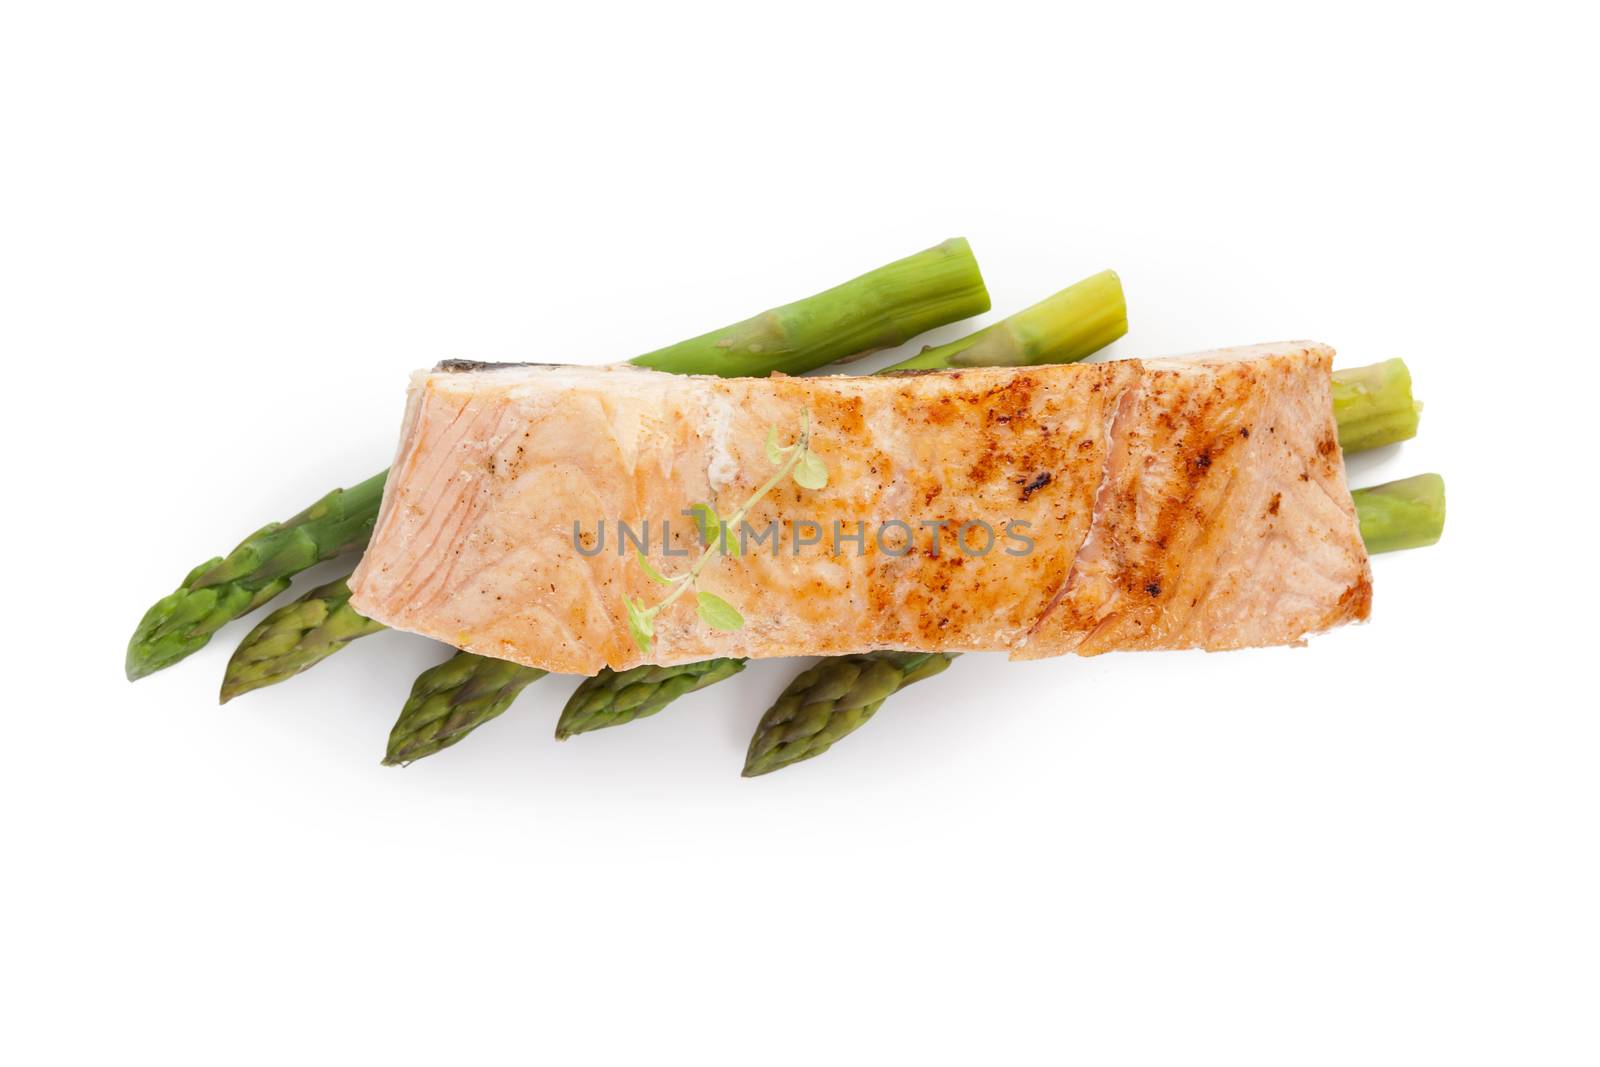 Delicious grilled salmon piece with fresh herbs on green asparagus on white background, top view. Healthy fish eating. 